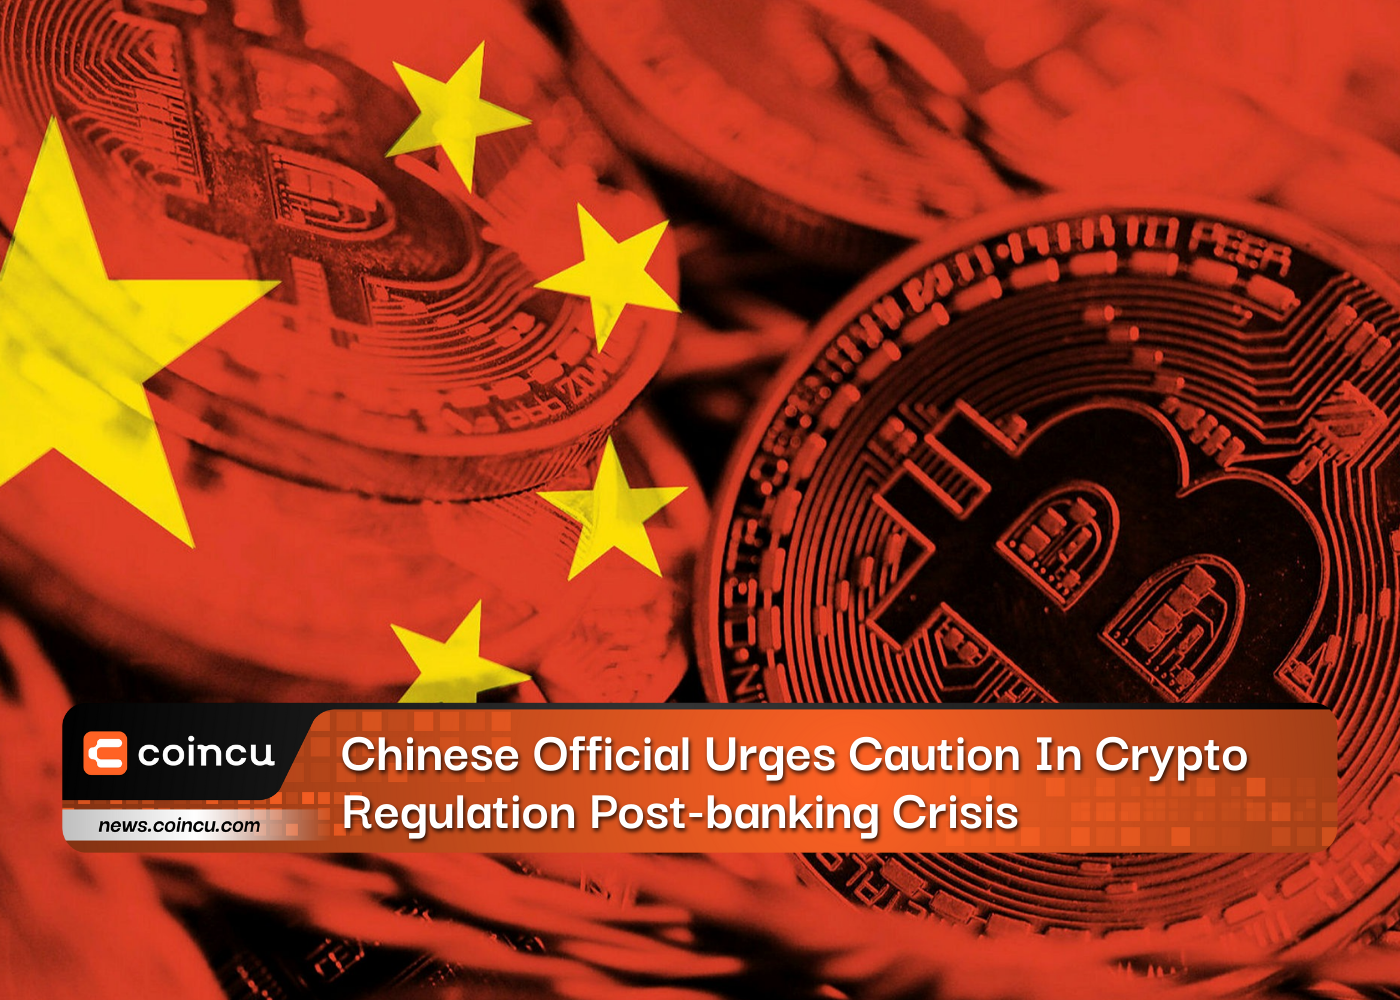 Chinese Official Urges Caution In Crypto Regulation Post-banking Crisis